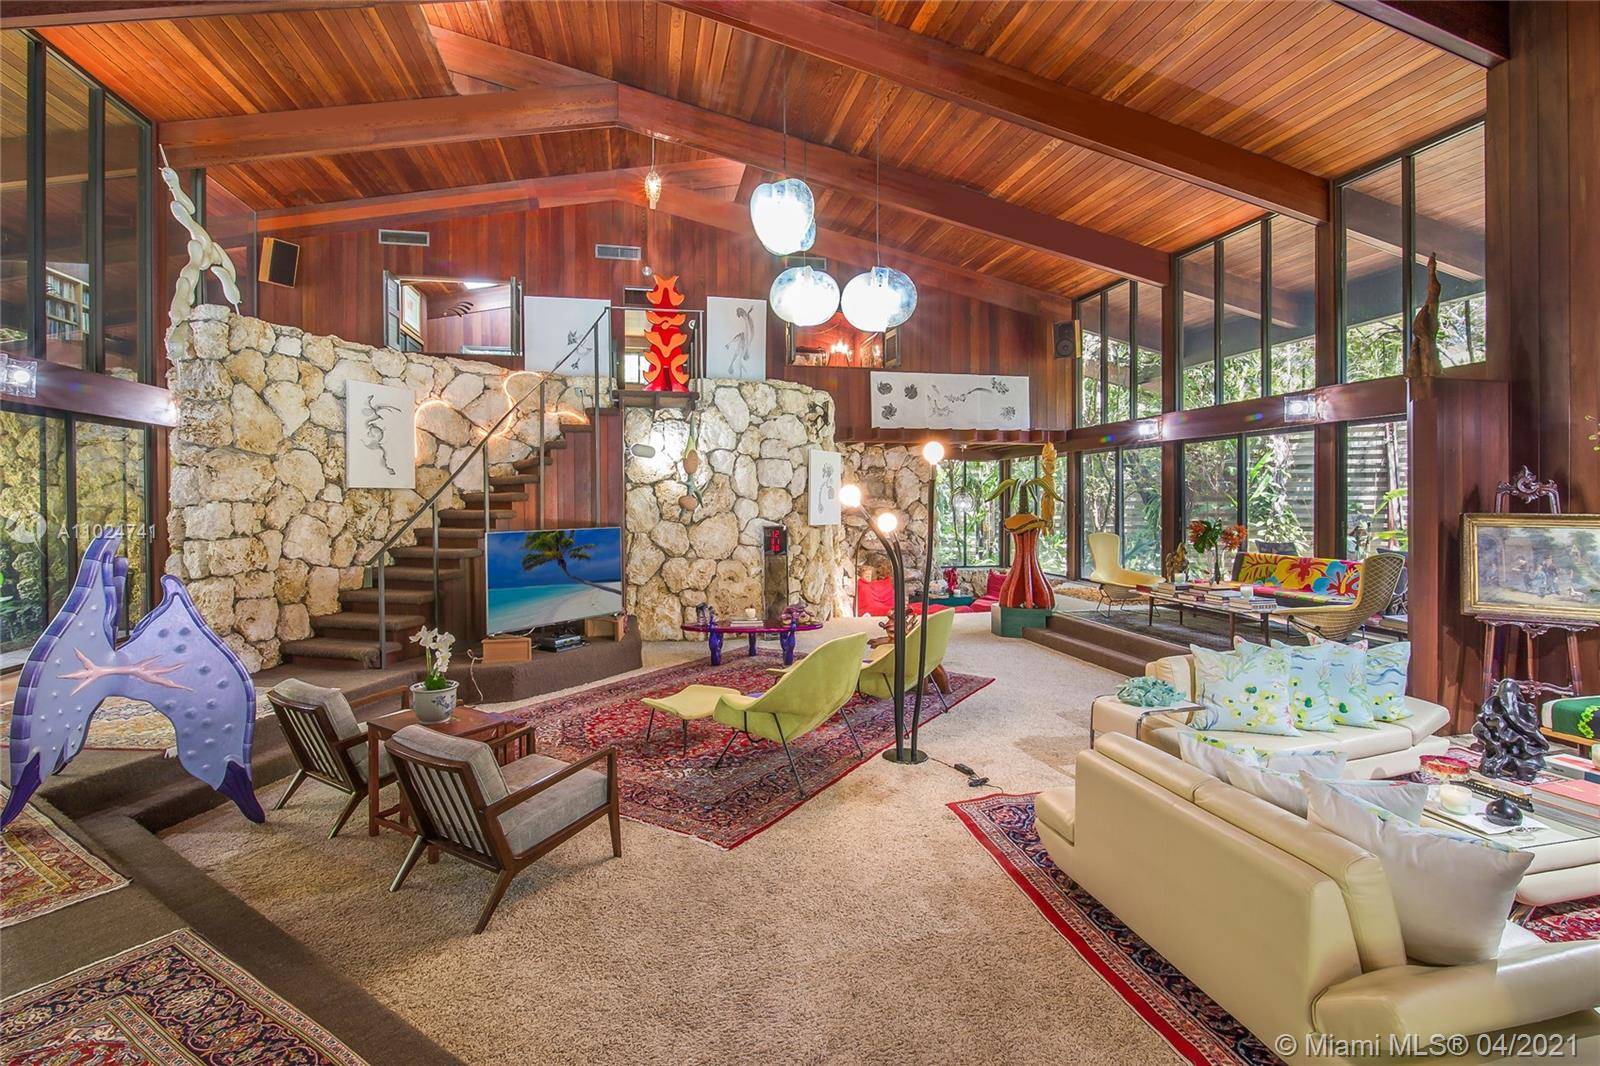 Inspired by the Organic American Style of architect Frank Lloyd Wright, architect Chayo Frank designed a home that is a Sanctuary Paradise unique and extraordinary in every aspect.